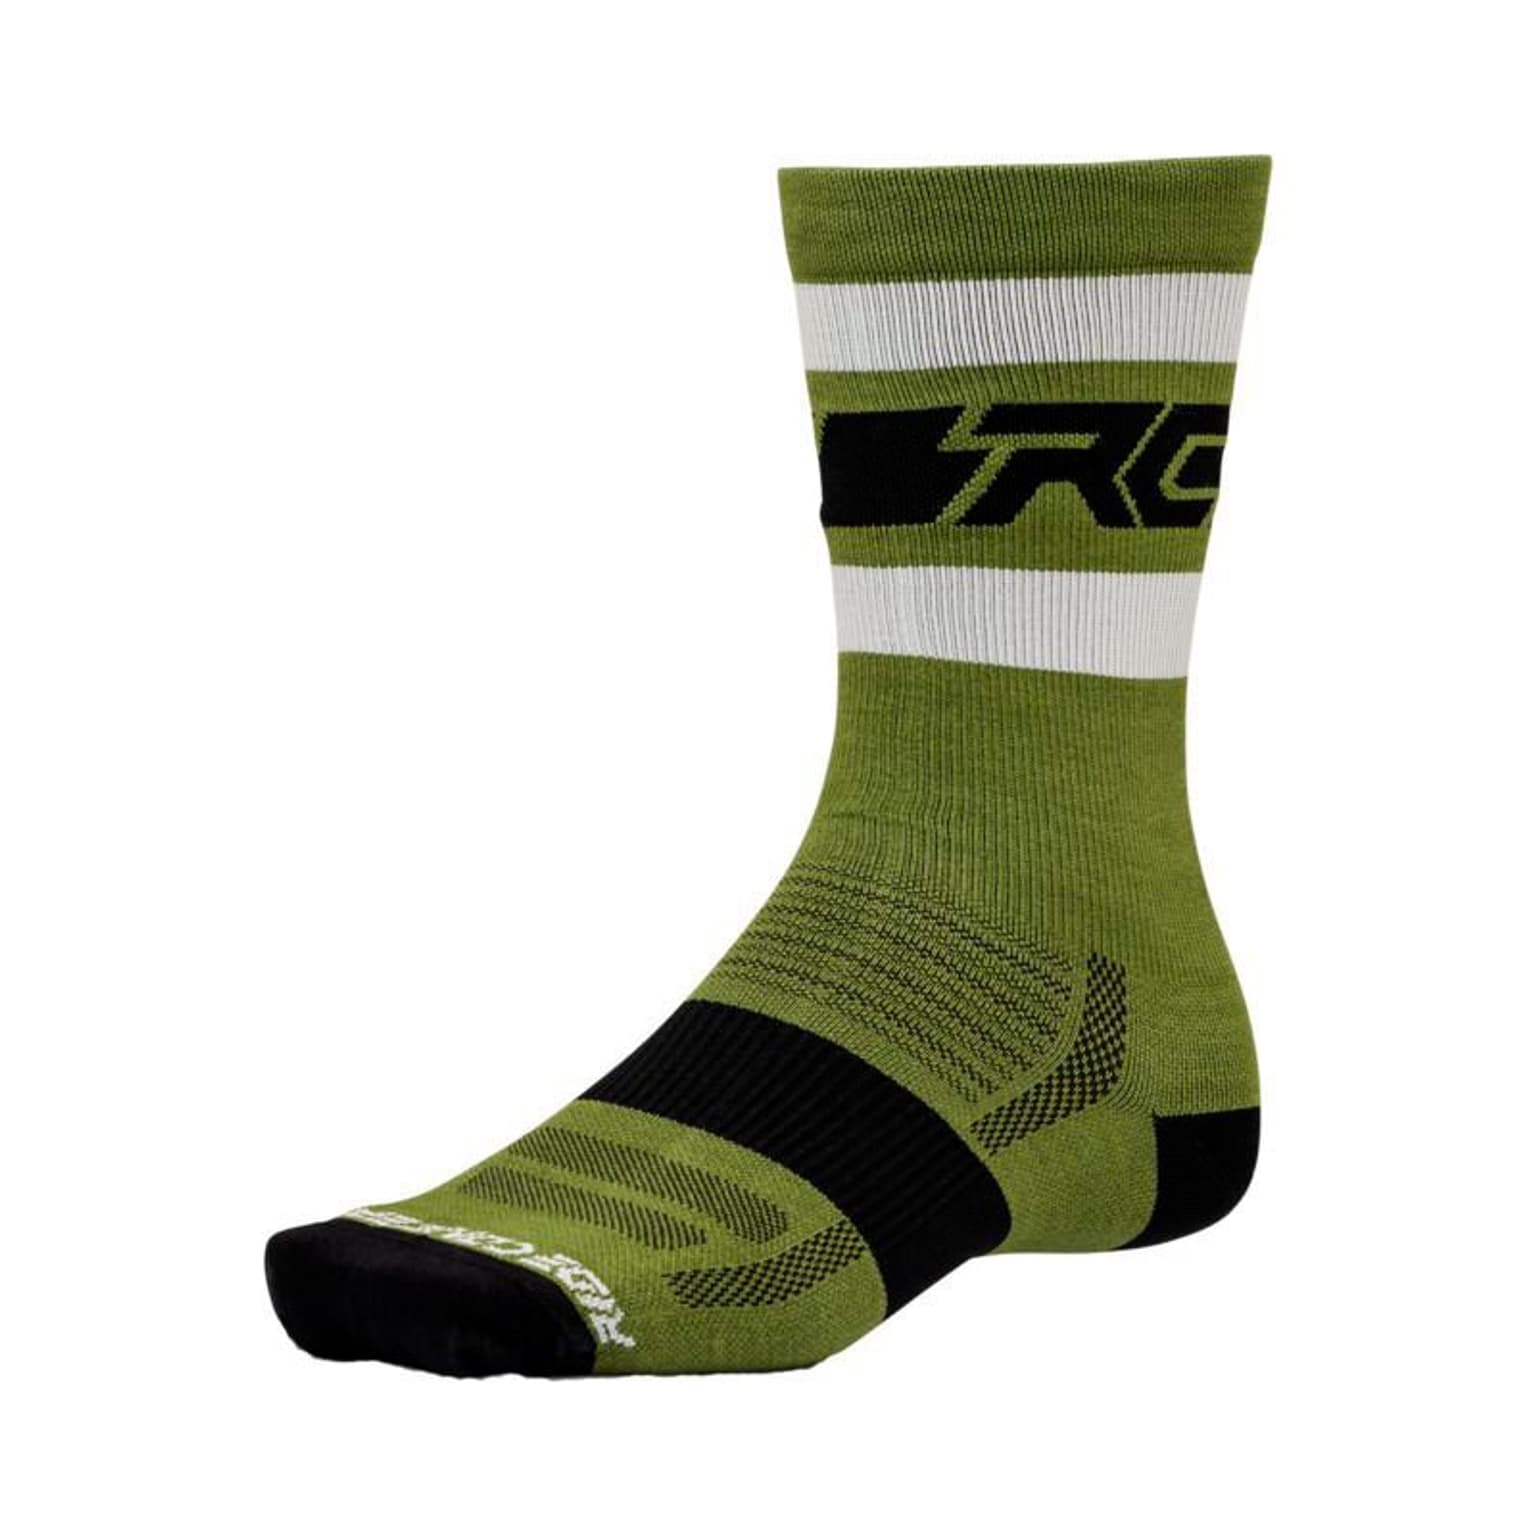 Ride Concepts Ride Concepts Woll Fifty-Fifty Velosocken moos 1